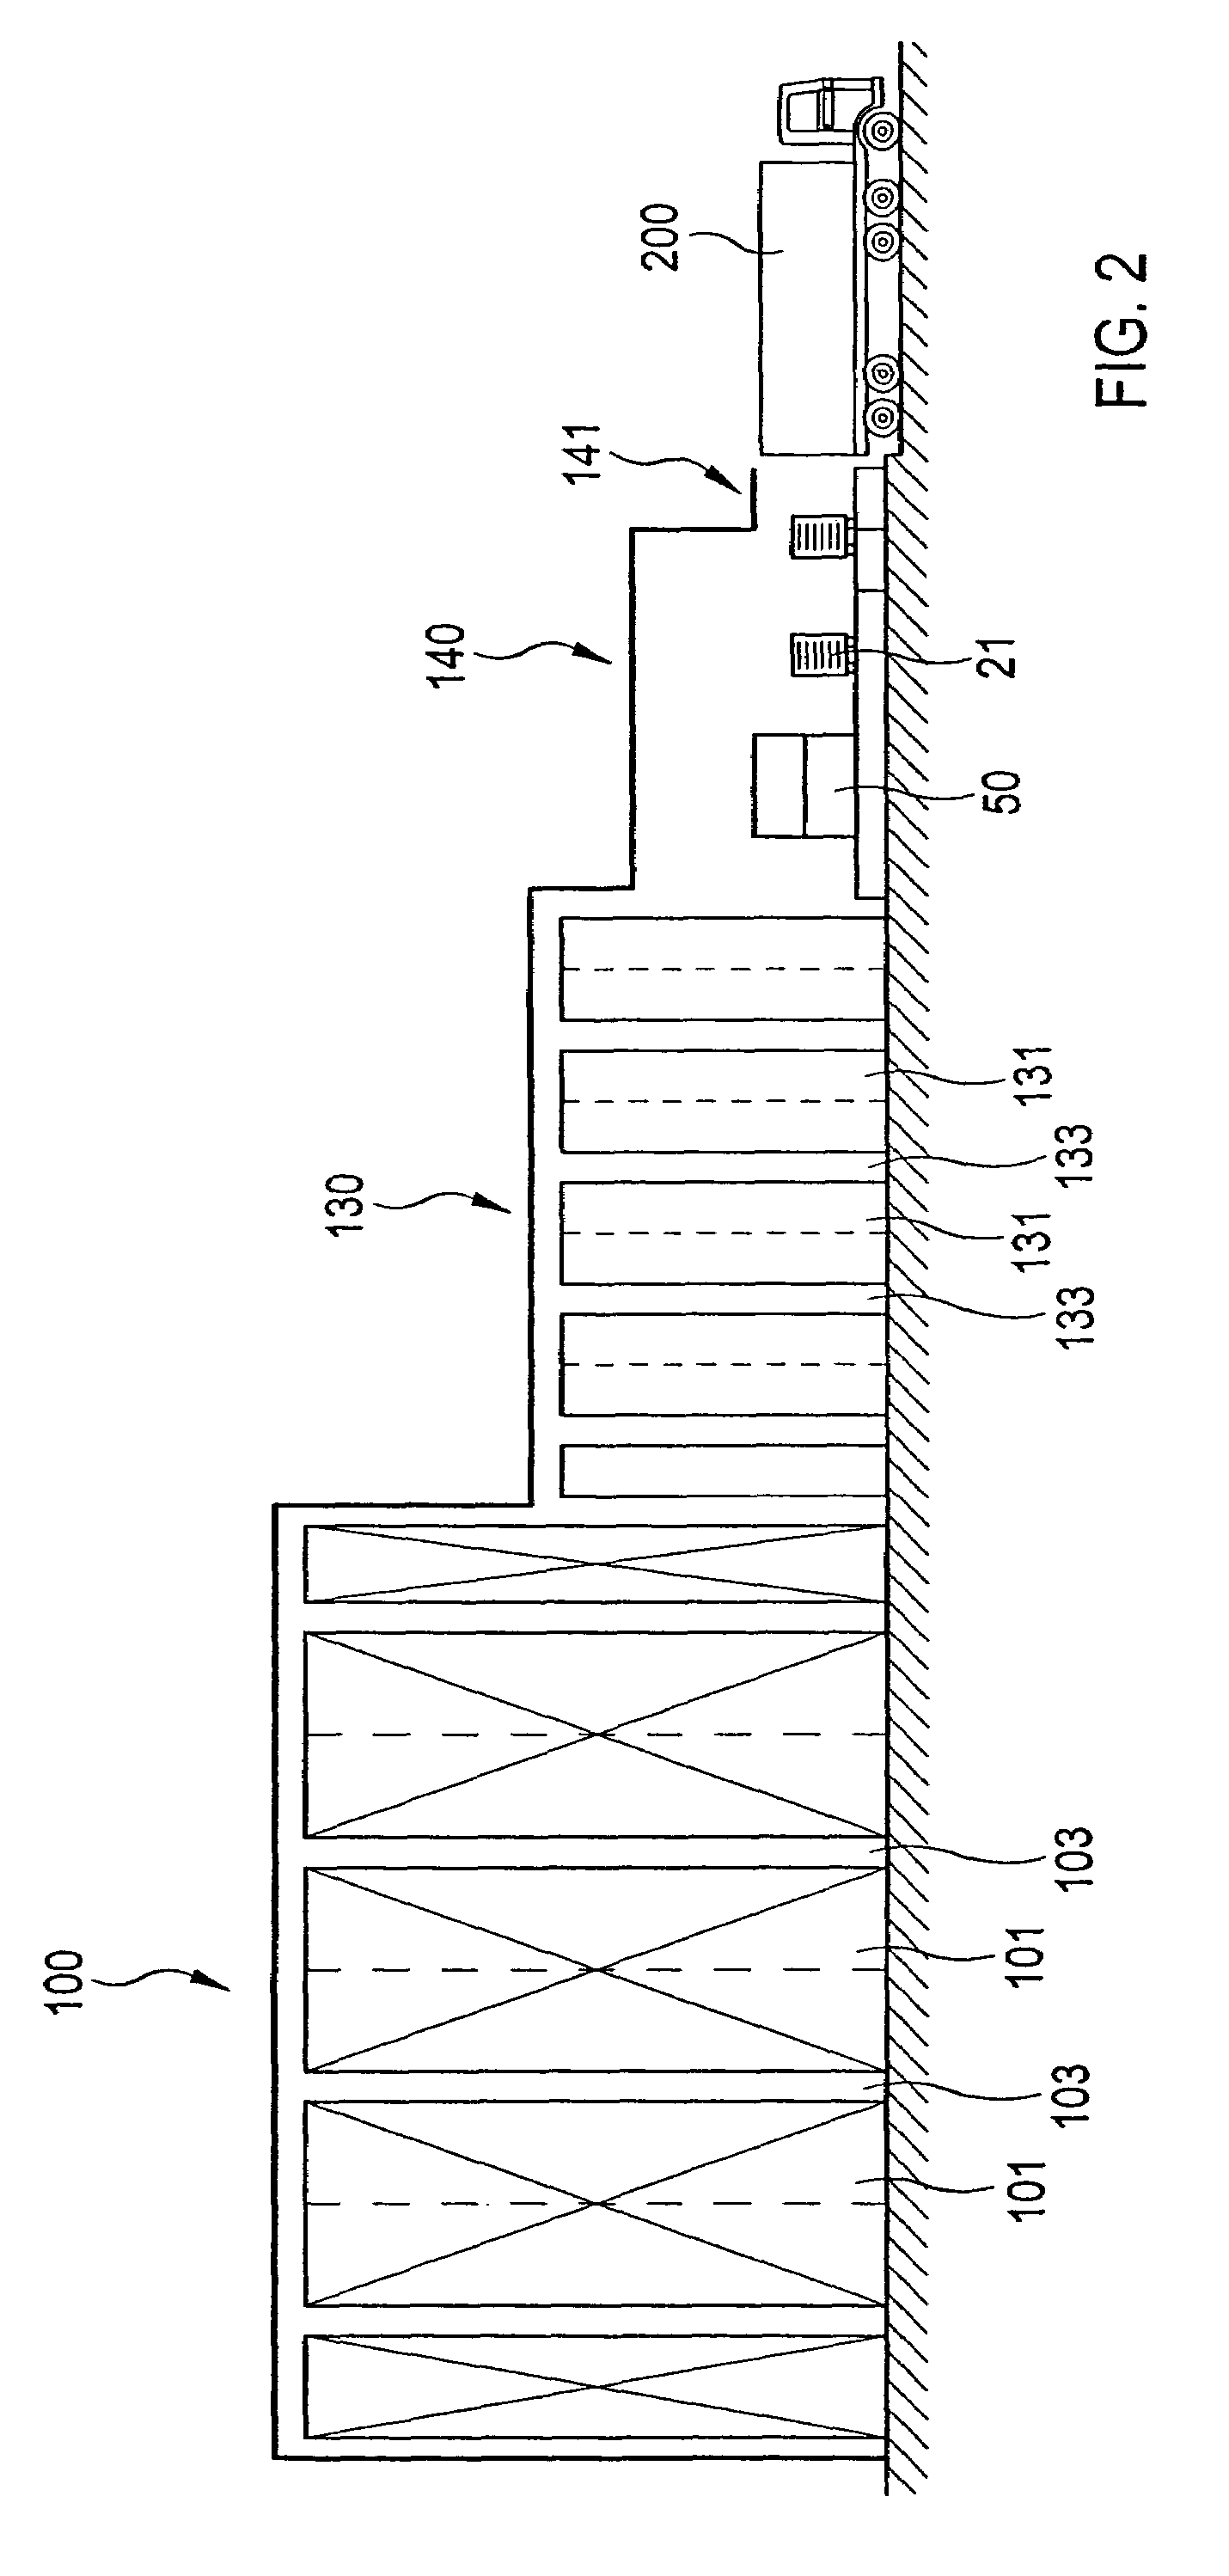 Apparatus for depositing a packing unit at a desired position on a load carrier